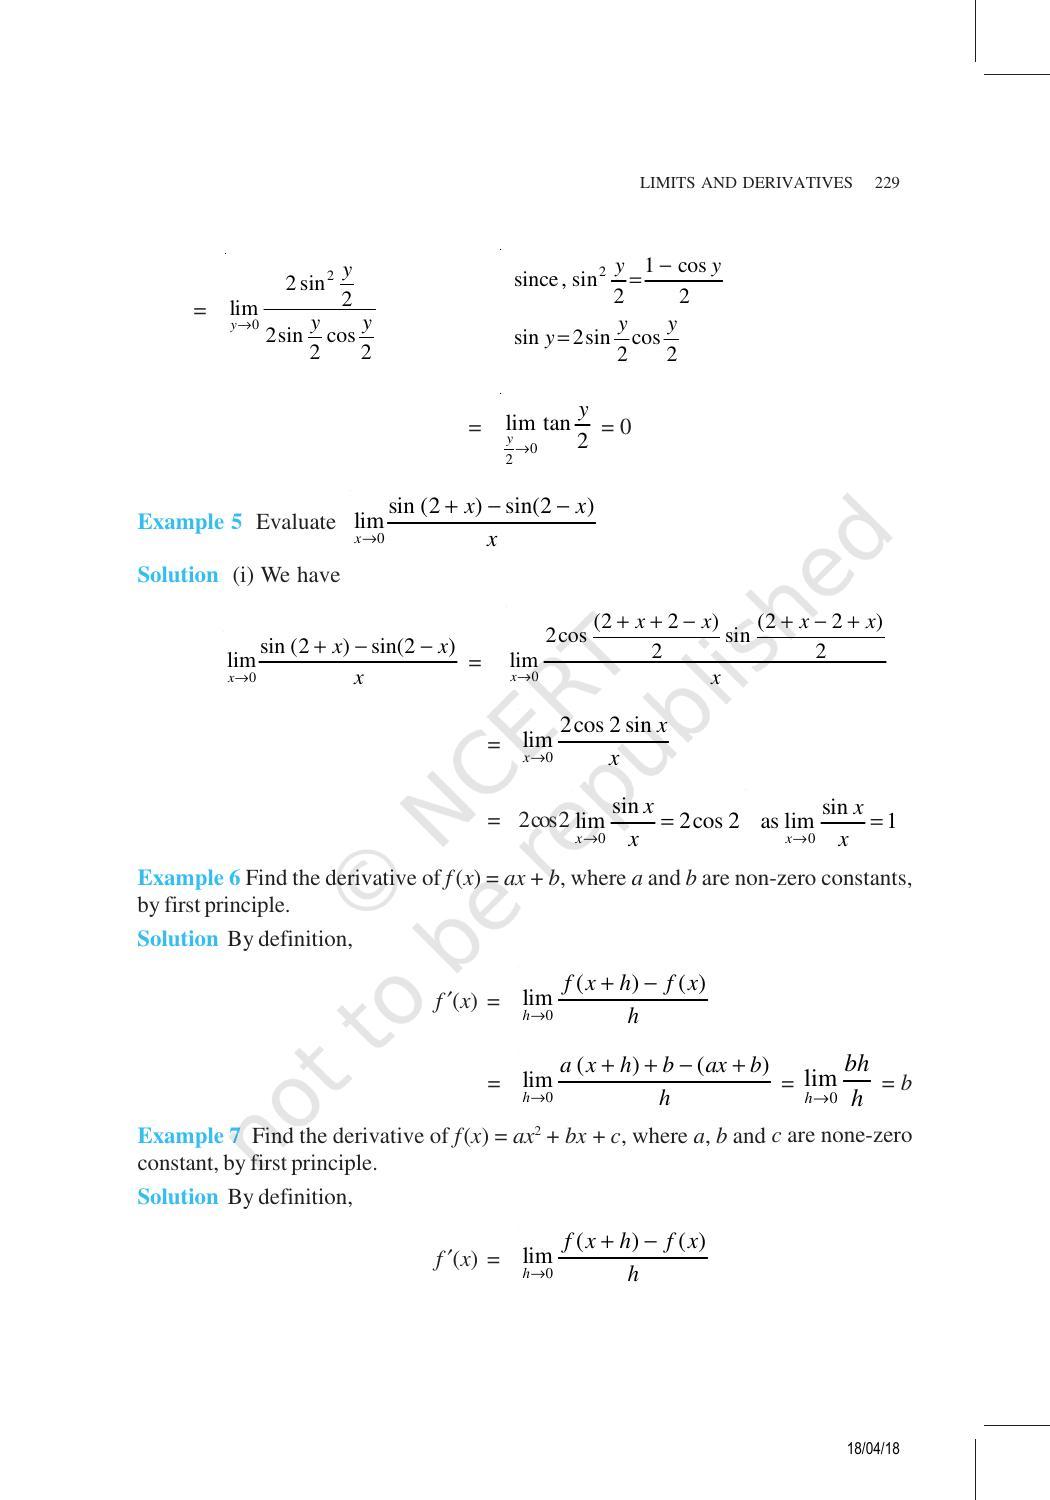 NCERT Exemplar Book for Class 11 Maths: Chapter 13 Limits and Derivatives - Page 5